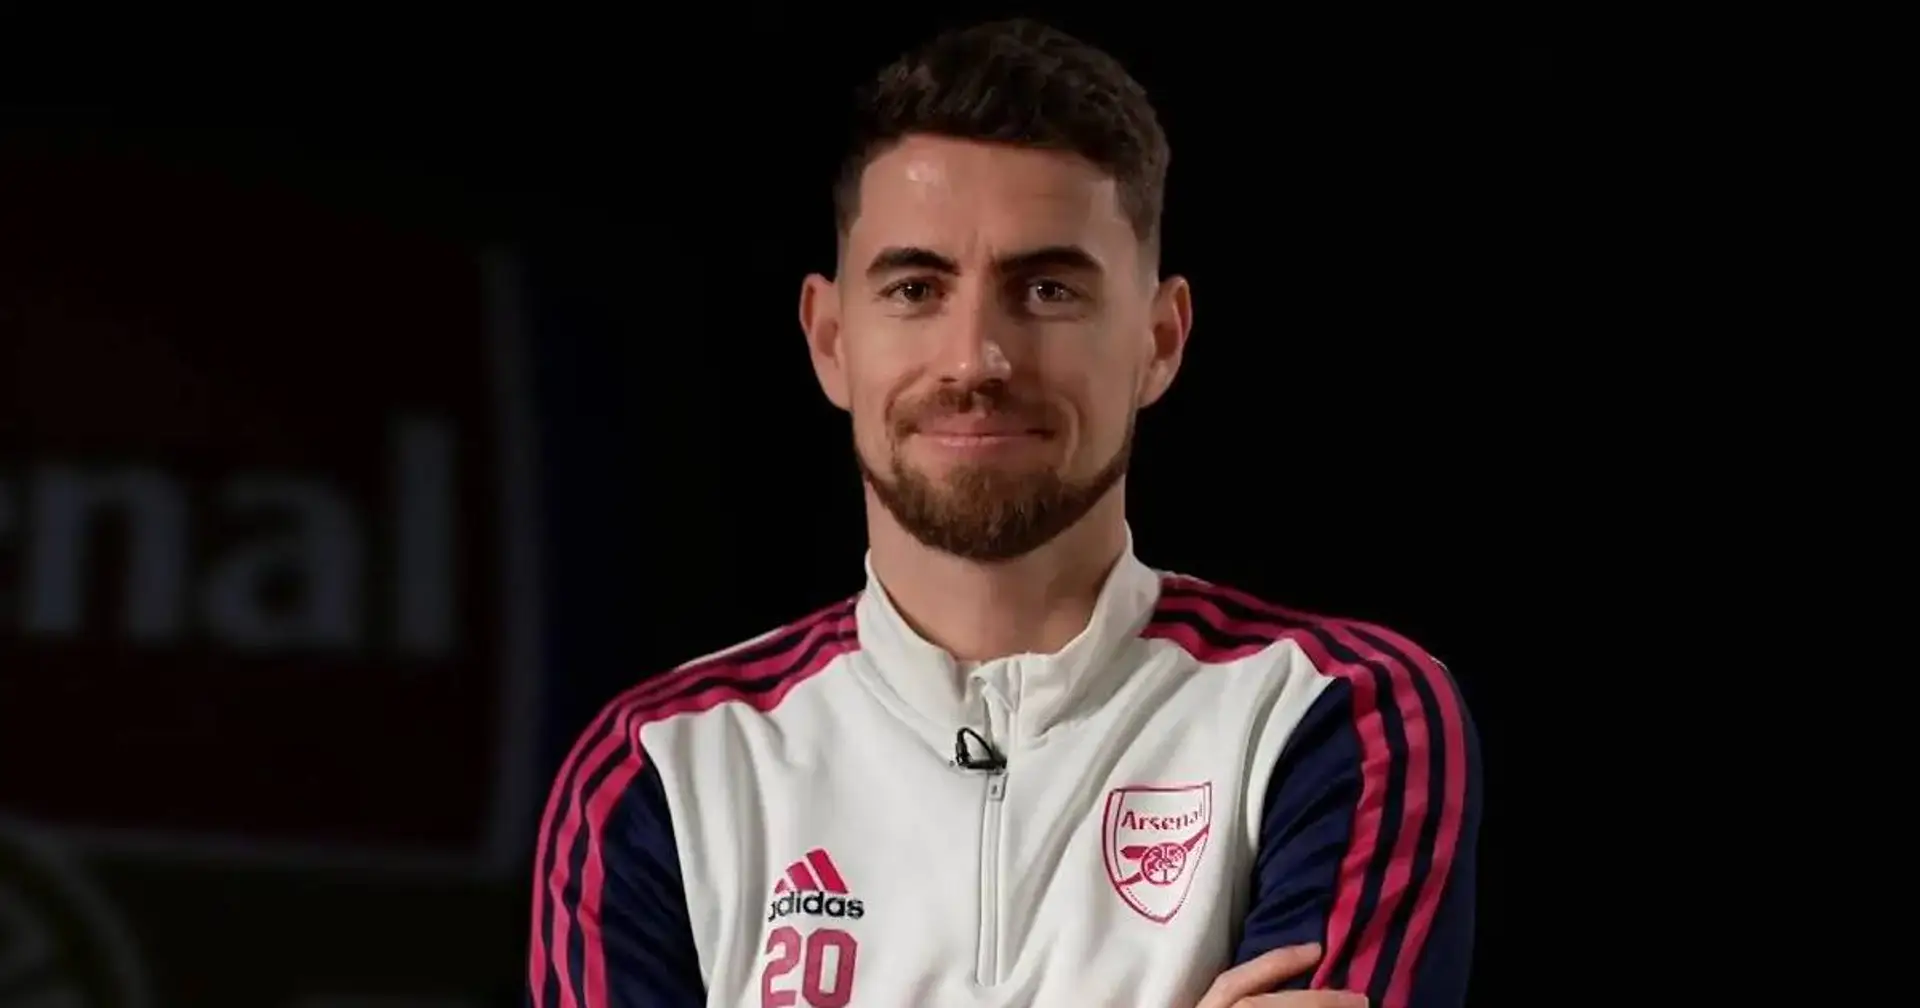 'Why not?': Jorginho's agent confirms he will meet Arsenal to discuss new contract